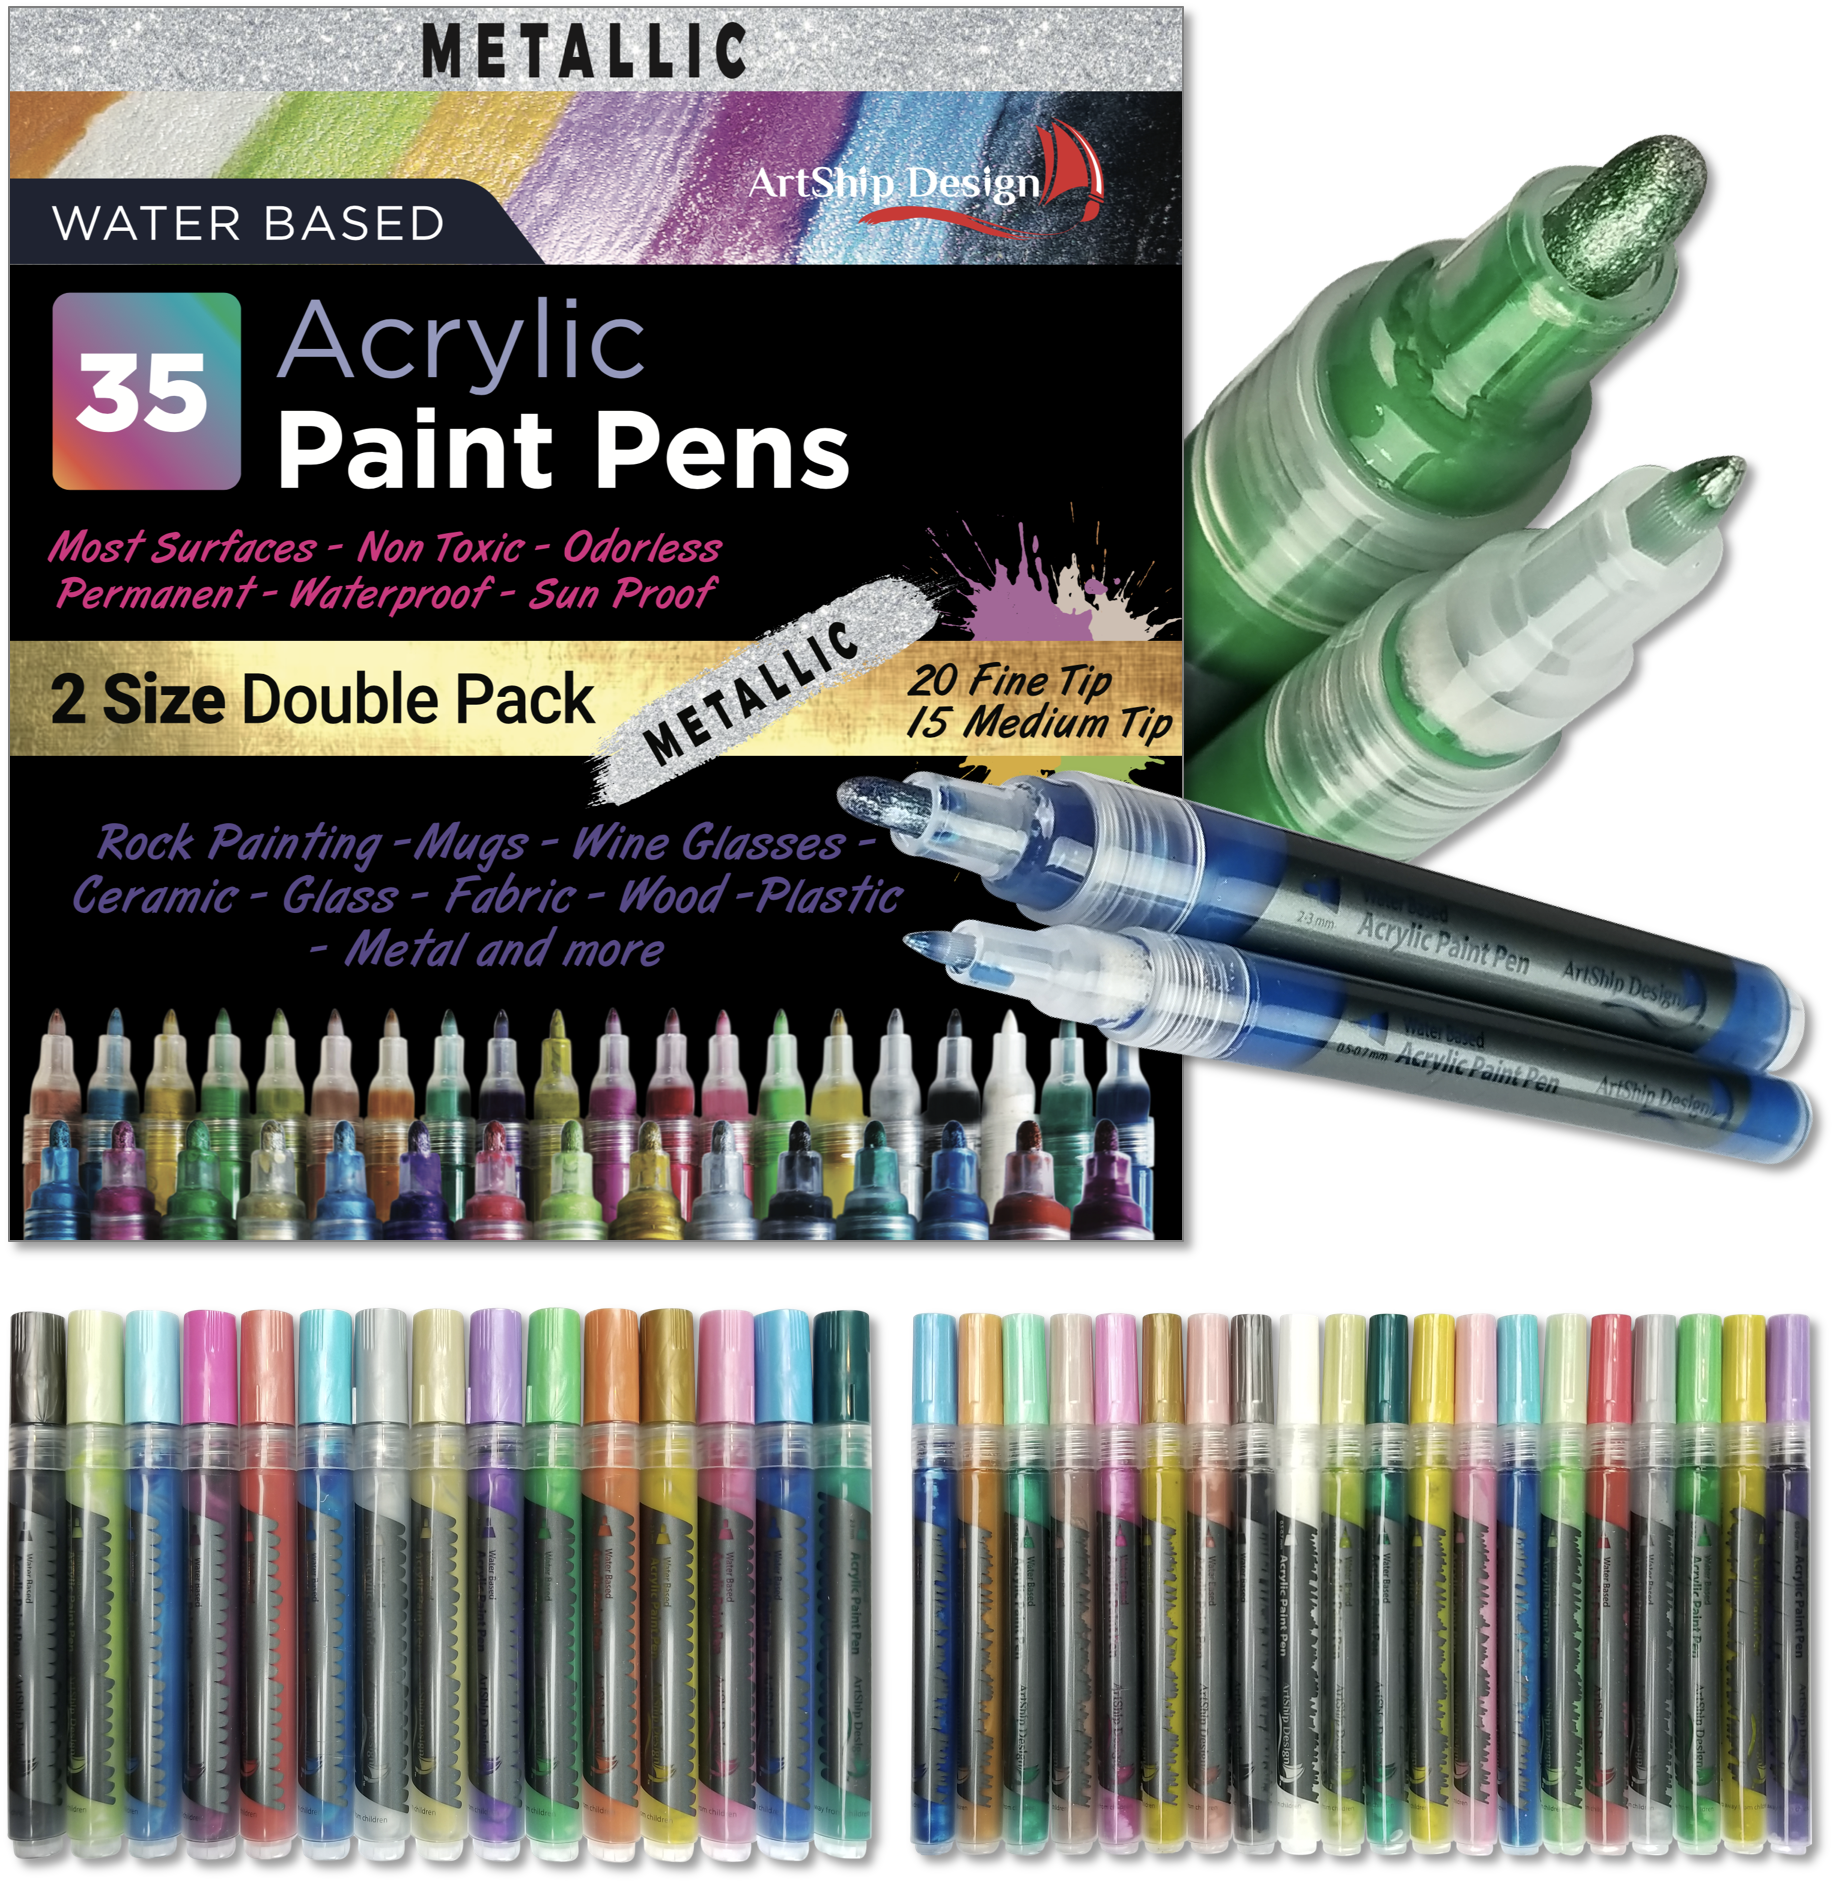 Chezaa 48pc Markers Pens Metallic Brush Pen Acrylic Art Markers Fine Tip Paint Coloring Sketch for DIY Scrapbooking Crafts Journaling Artists Adults Kids 